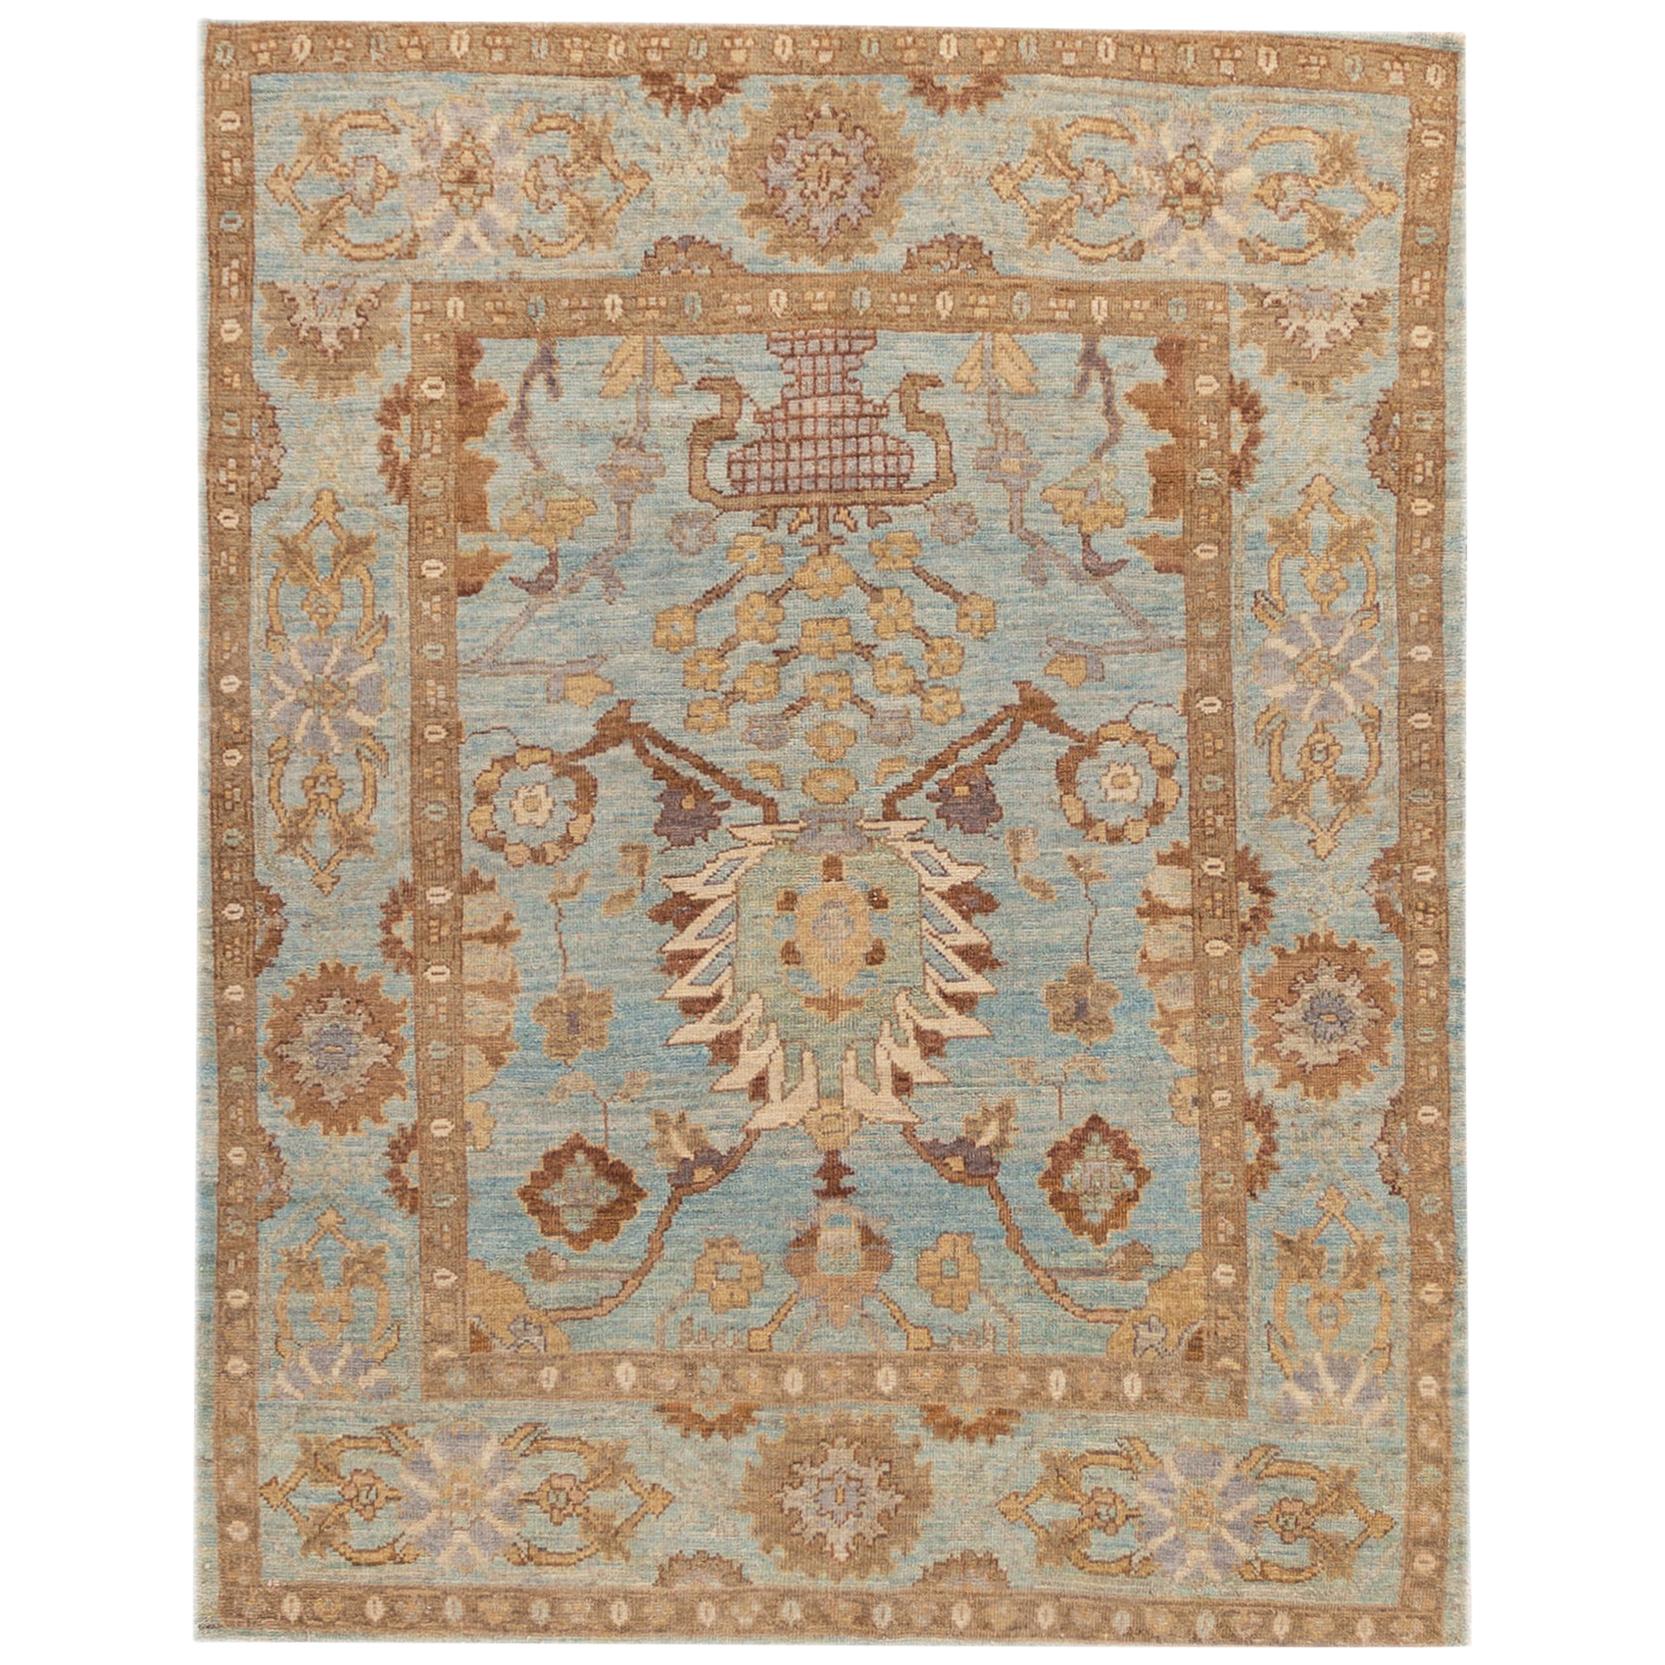 21st Century Modern Square Persian Sultanabad Rug